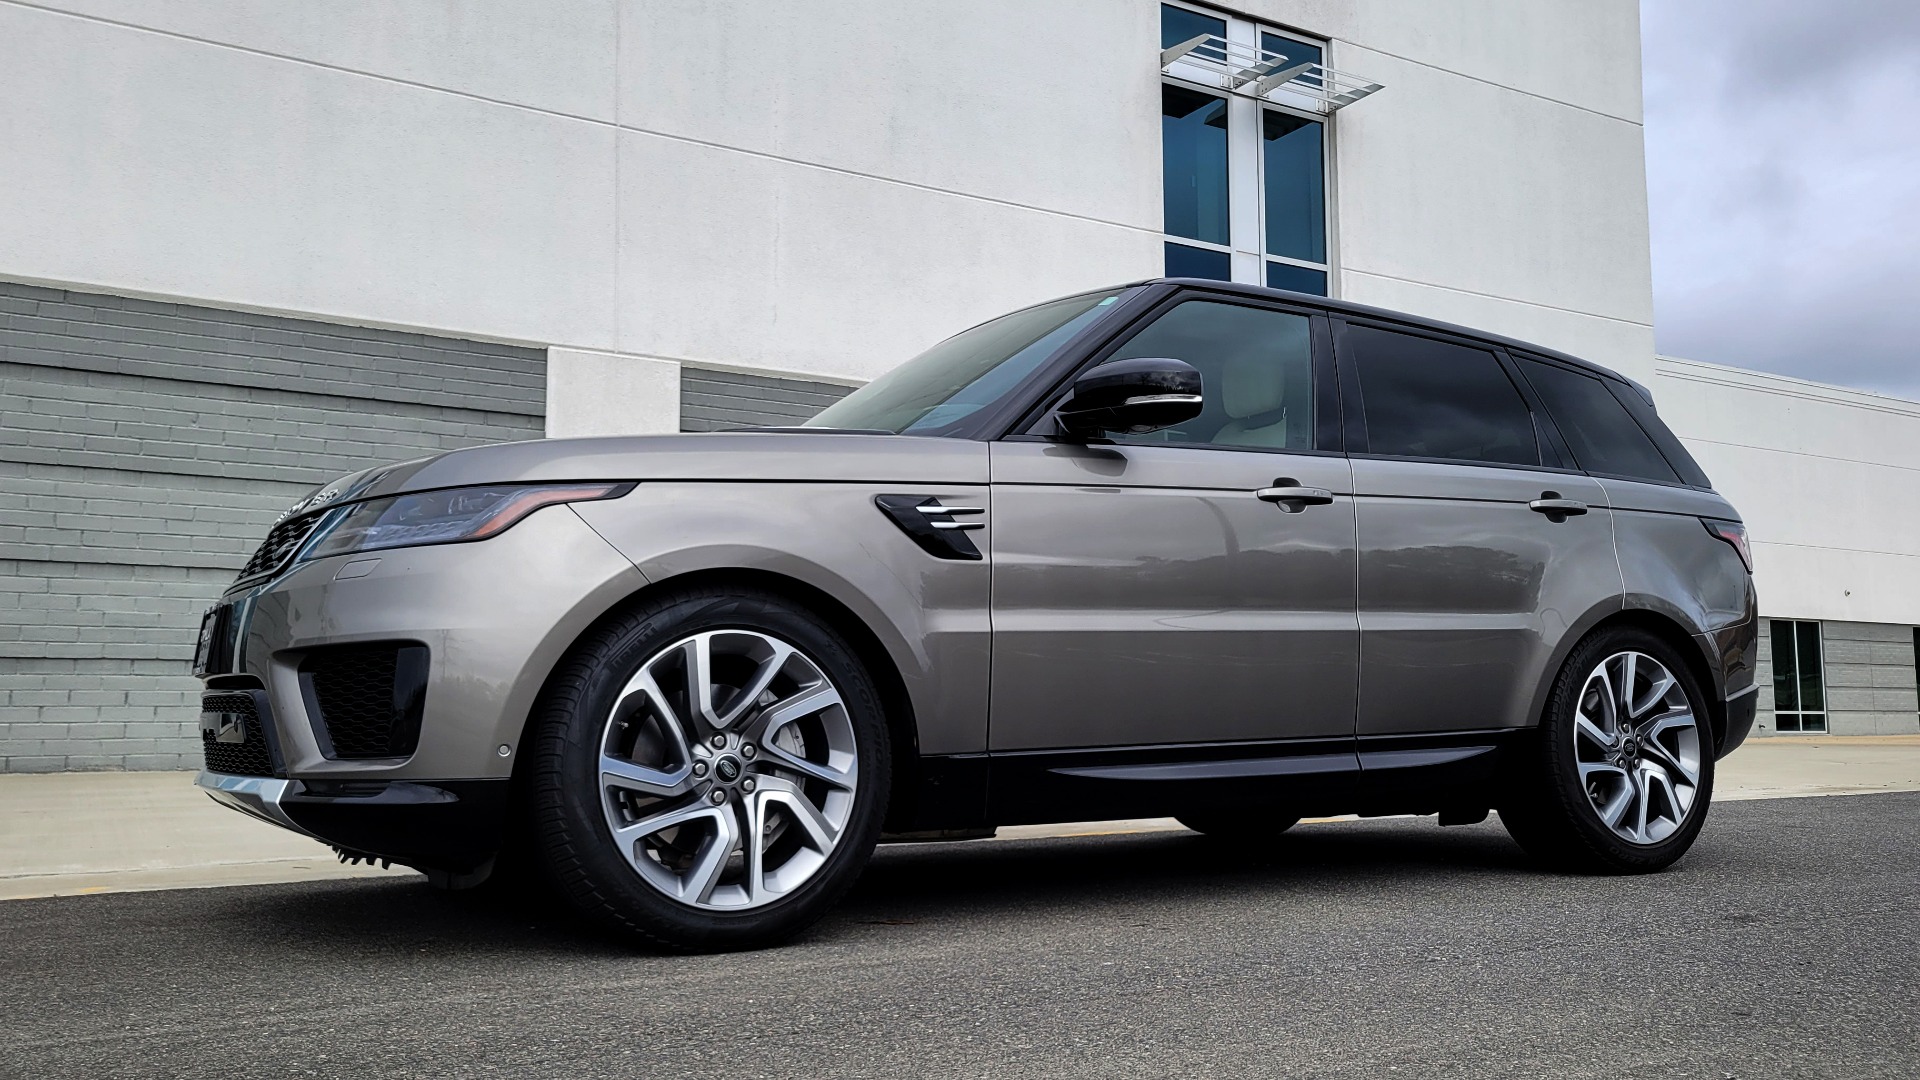 Used 2020 Land Rover RANGE ROVER SPORT HSE / 3.0L SC I6 / 8-SPD AUTO / NAV / PANO-ROOF / REARVIEW for sale Sold at Formula Imports in Charlotte NC 28227 3